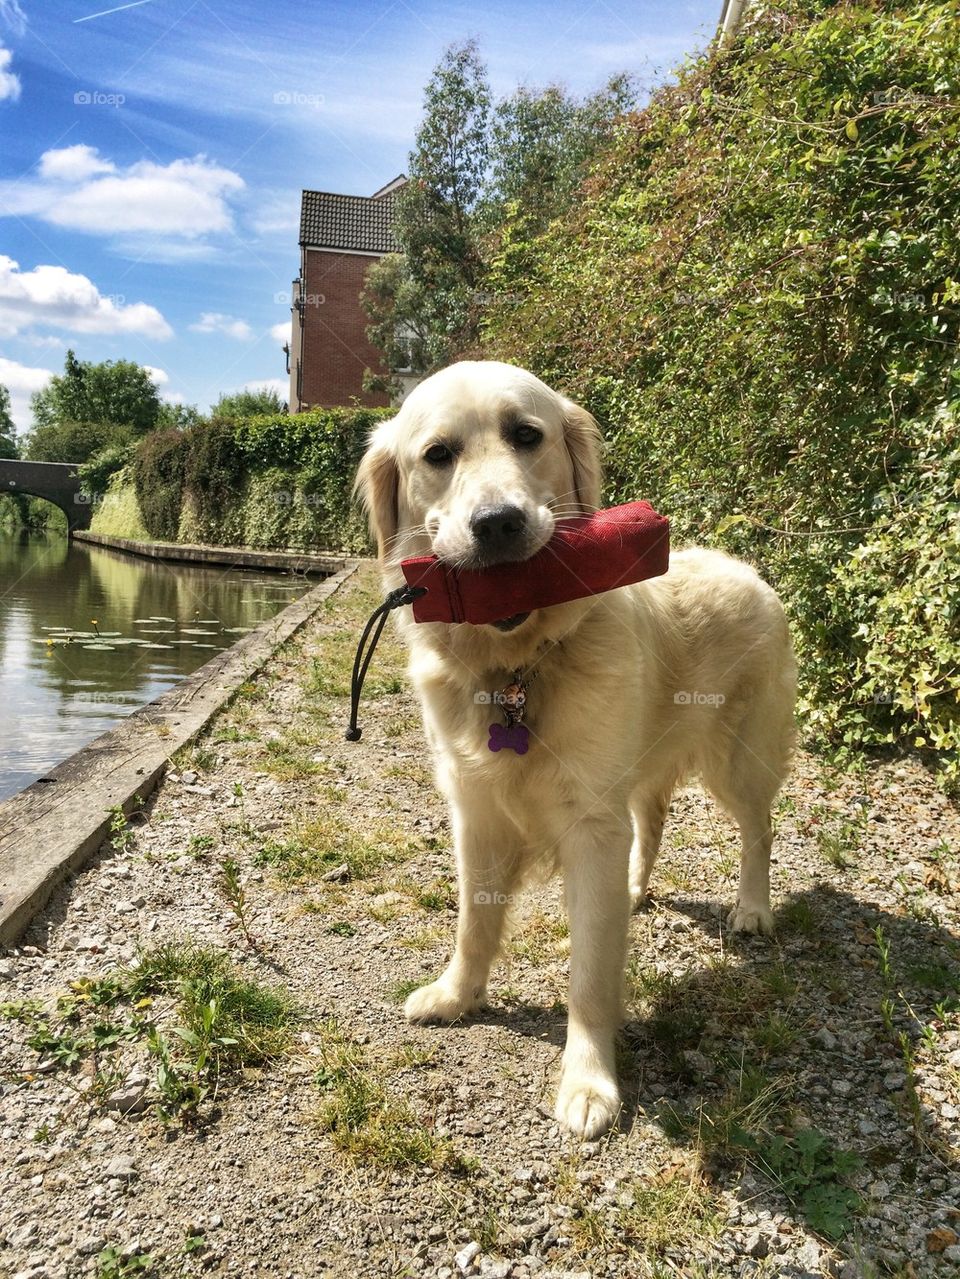 Sweet Zoe at the canal